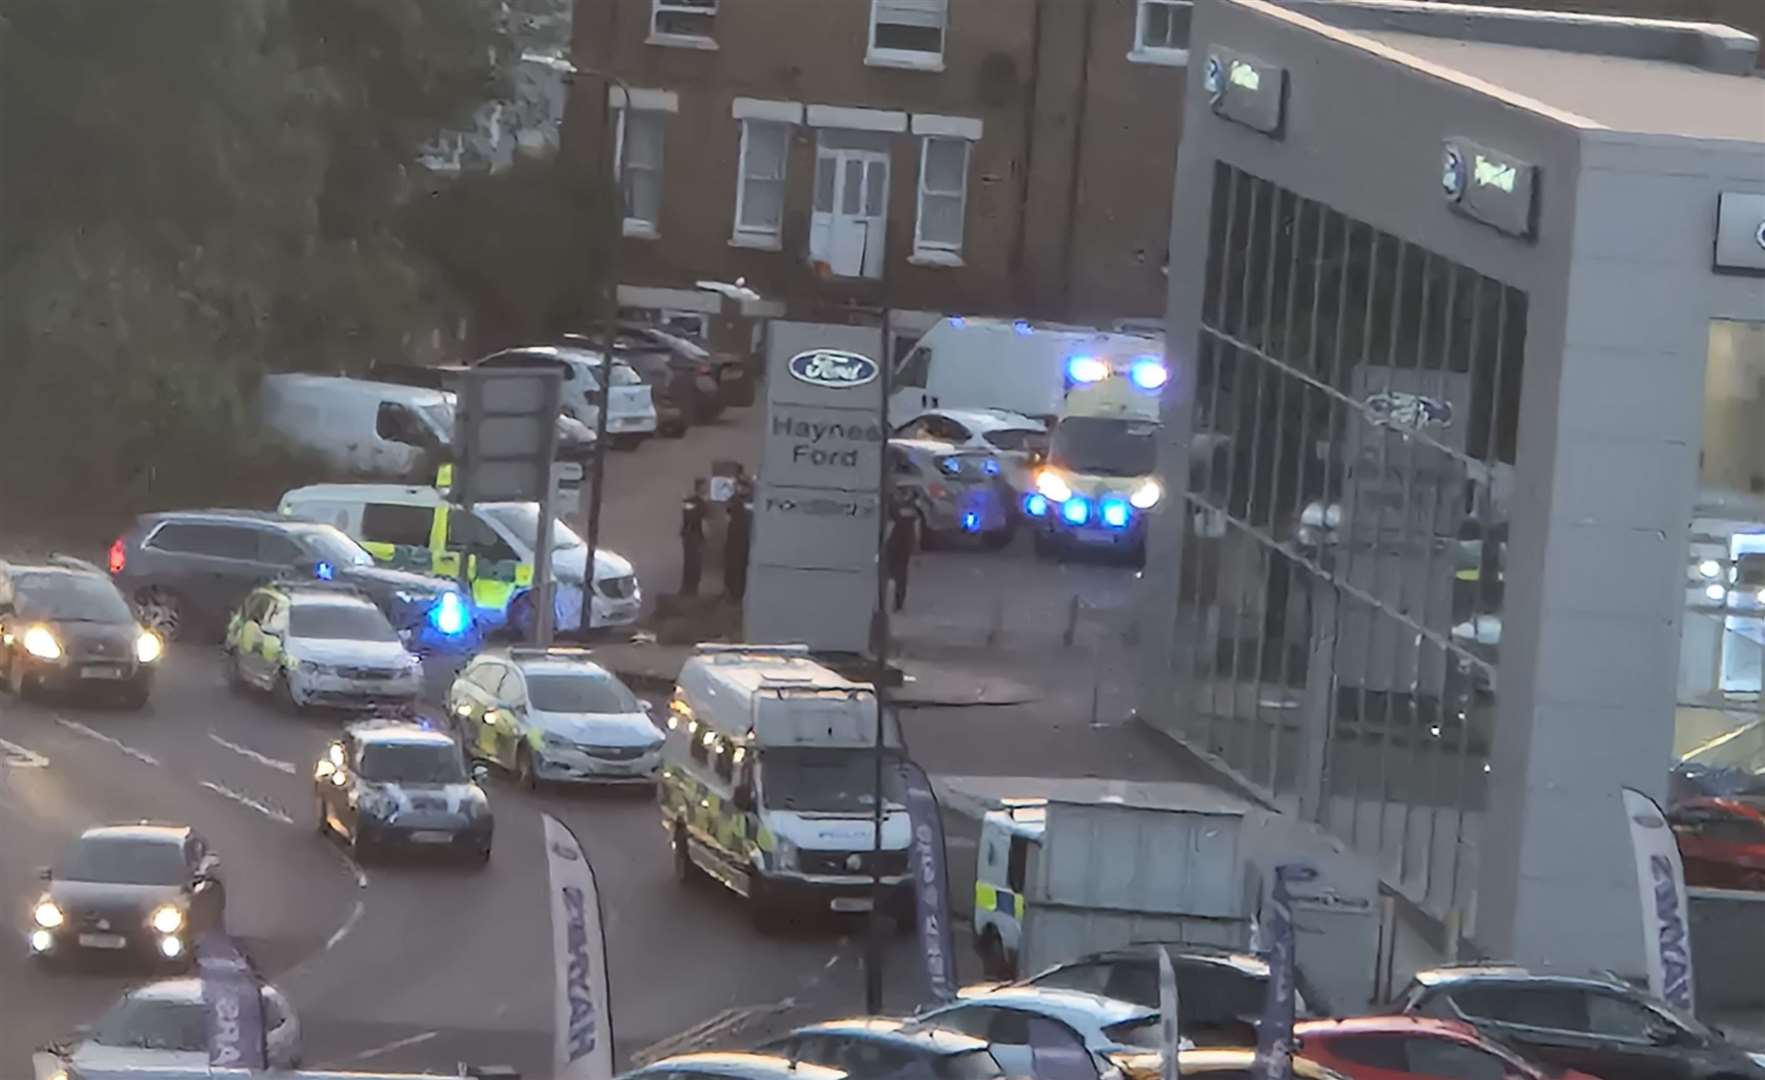 Emergency services were called to Andrew Broughton Way in Maidstone. Picture: Laura Matisone